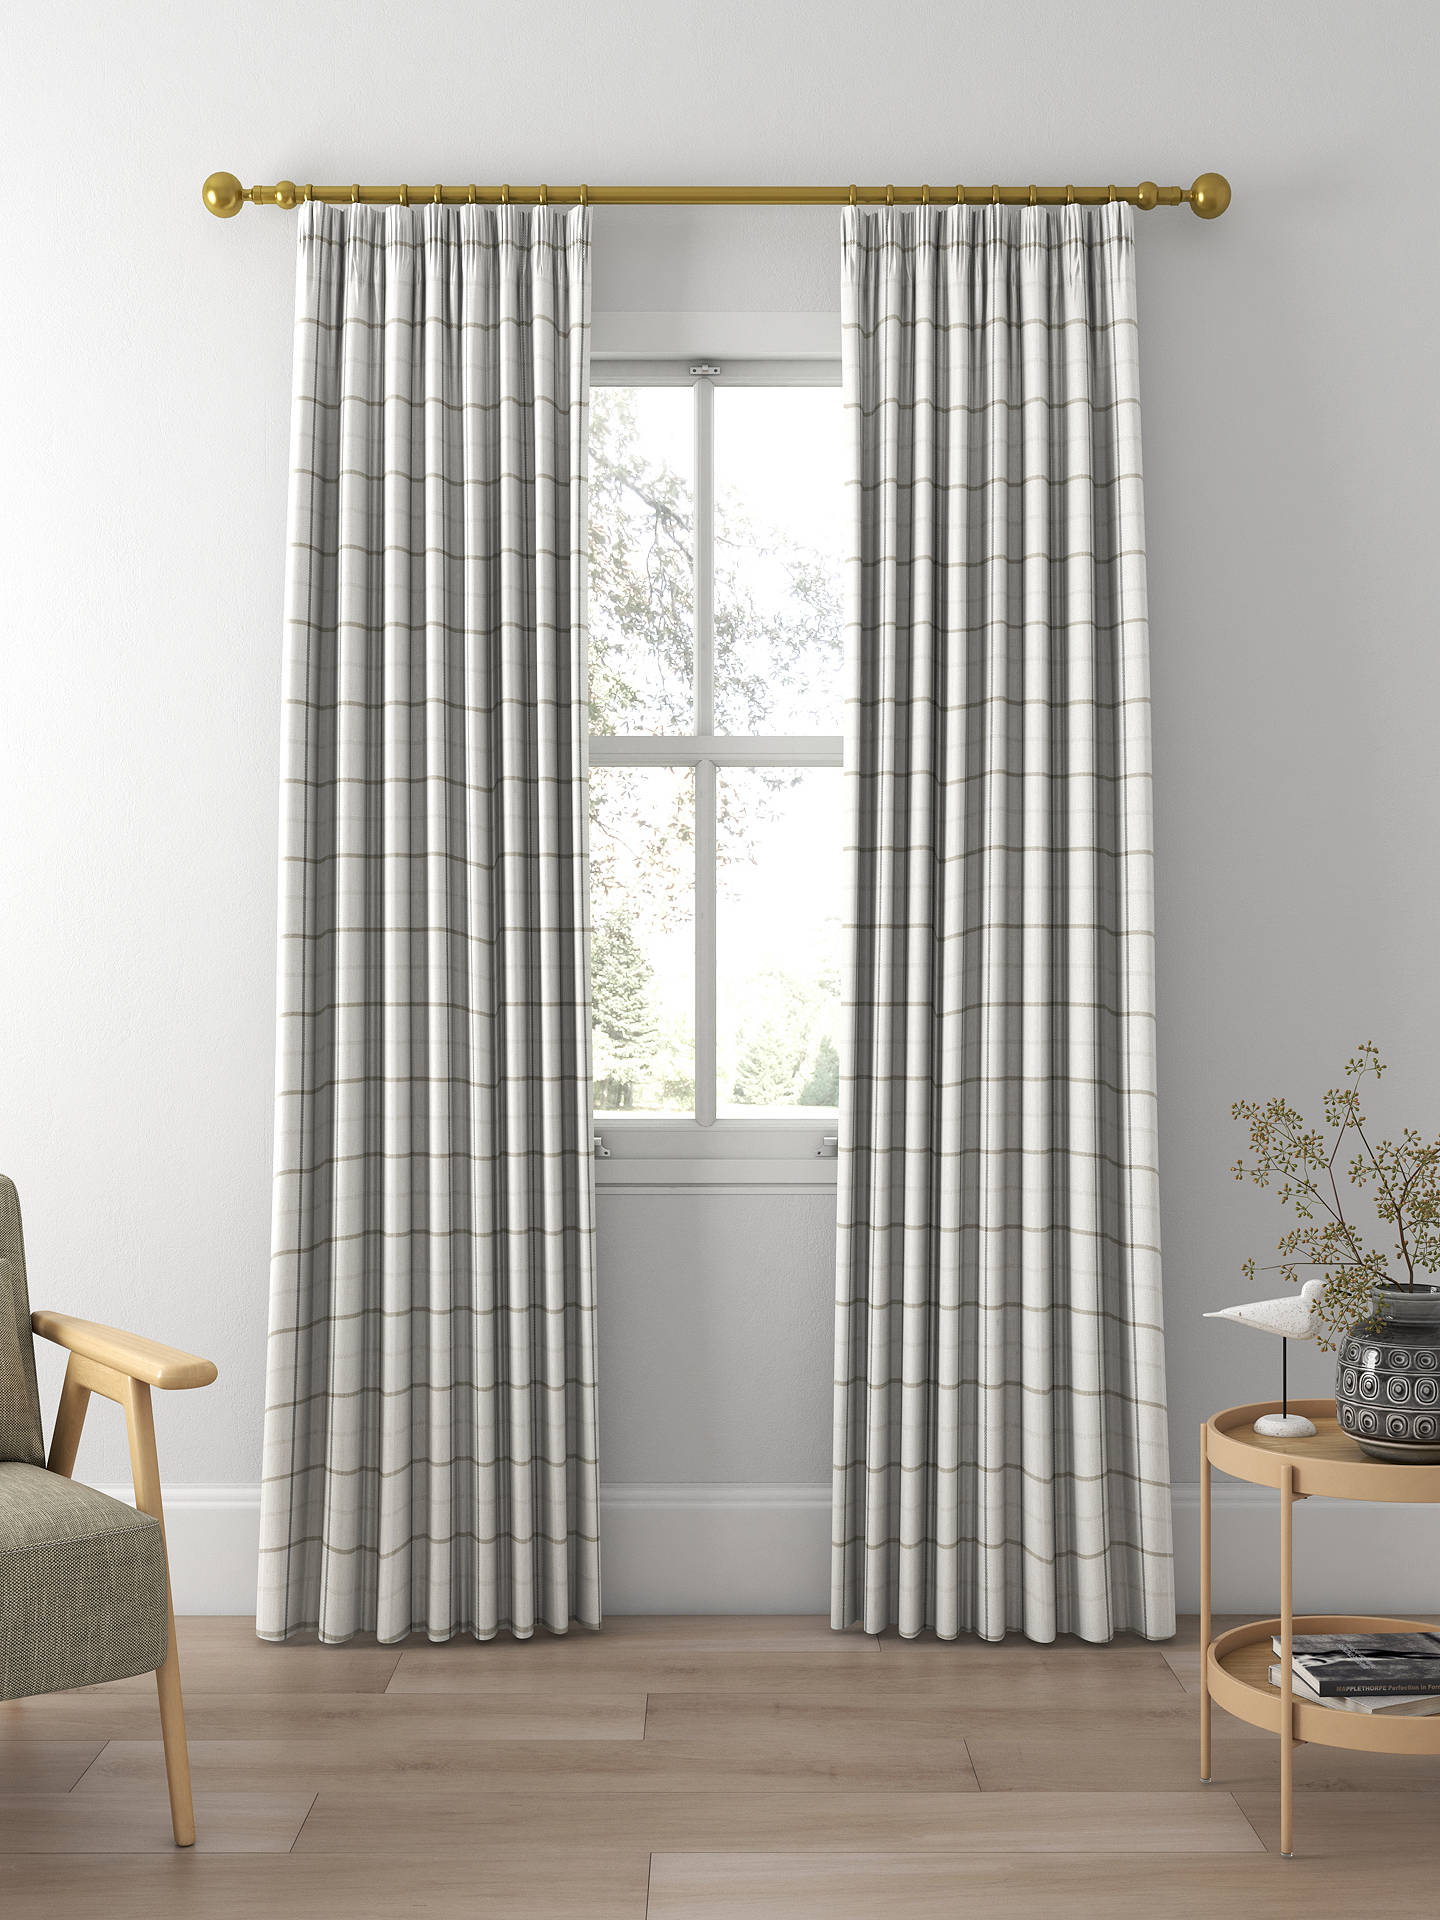 Prestigious Textiles Balmoral Made to Measure Curtains, Sterling